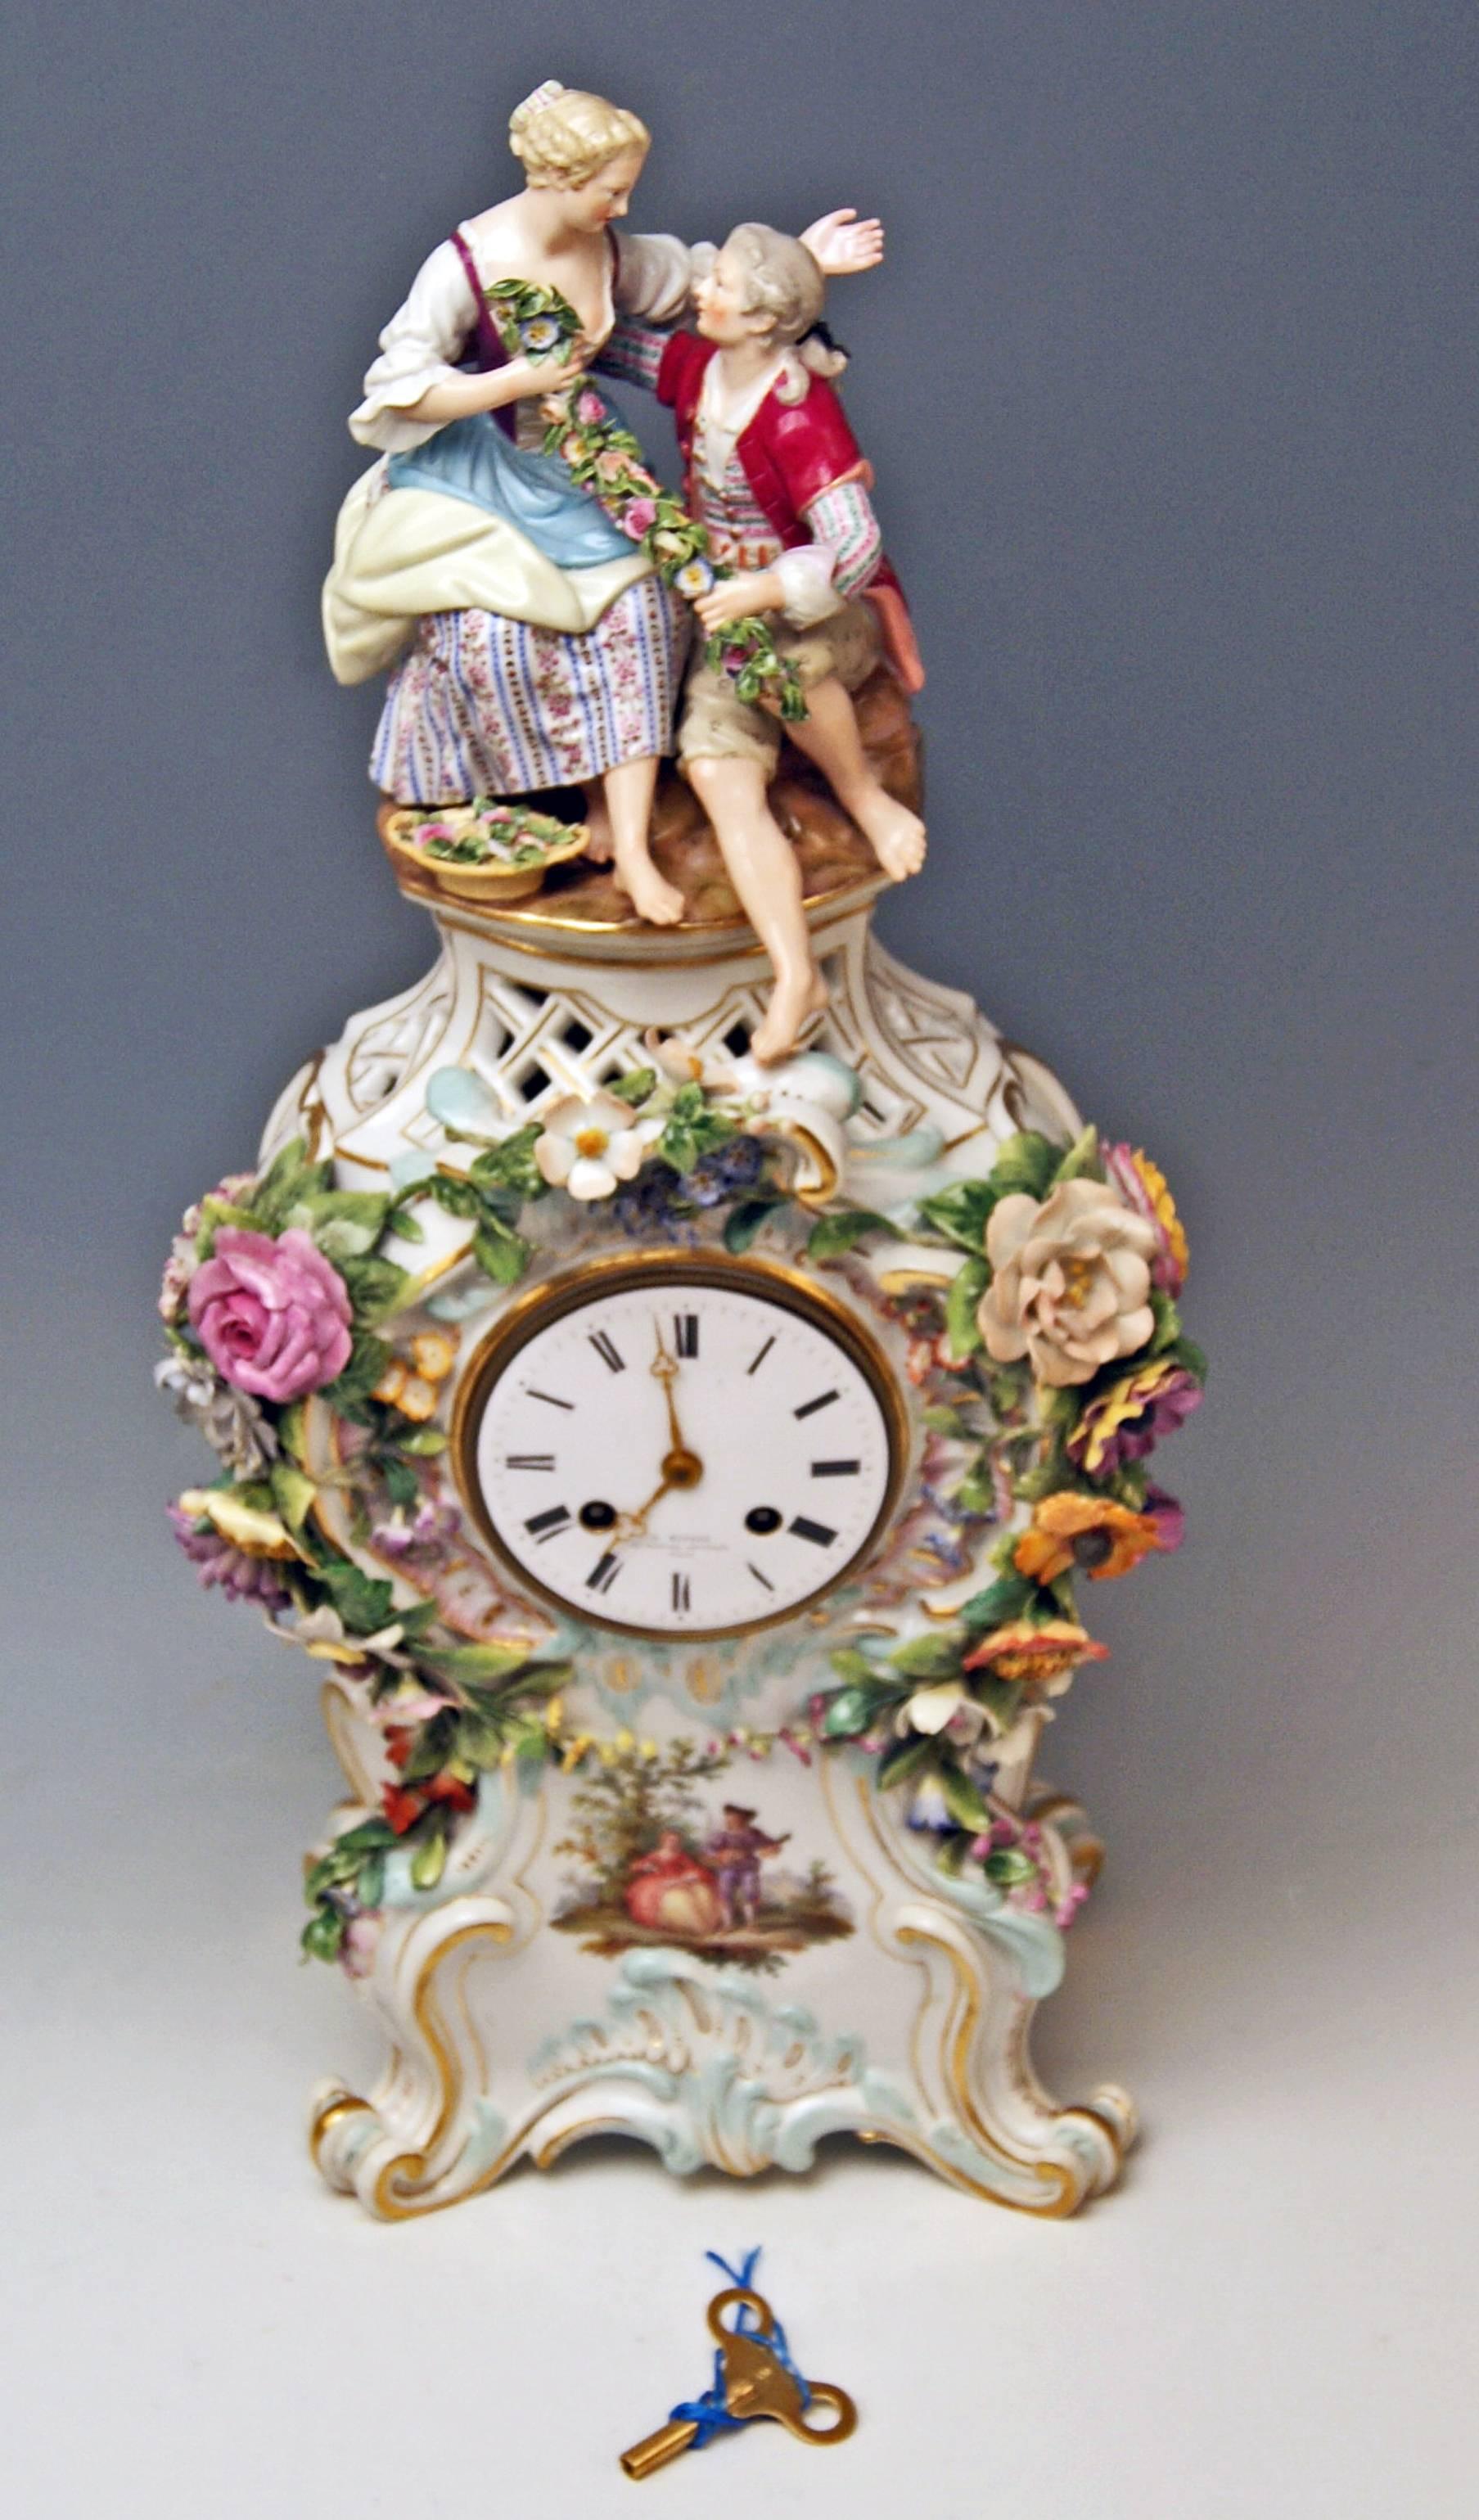 Meissen Gorgeous mantel / table clock abundantly decorated with sculptured figurines and flowers

Manufactory: Meissen
Hallmarked: Blue Meissen Sword Mark (underglazed)
First quality 
Model number 573 / painter's number 2 / former's number 76 /